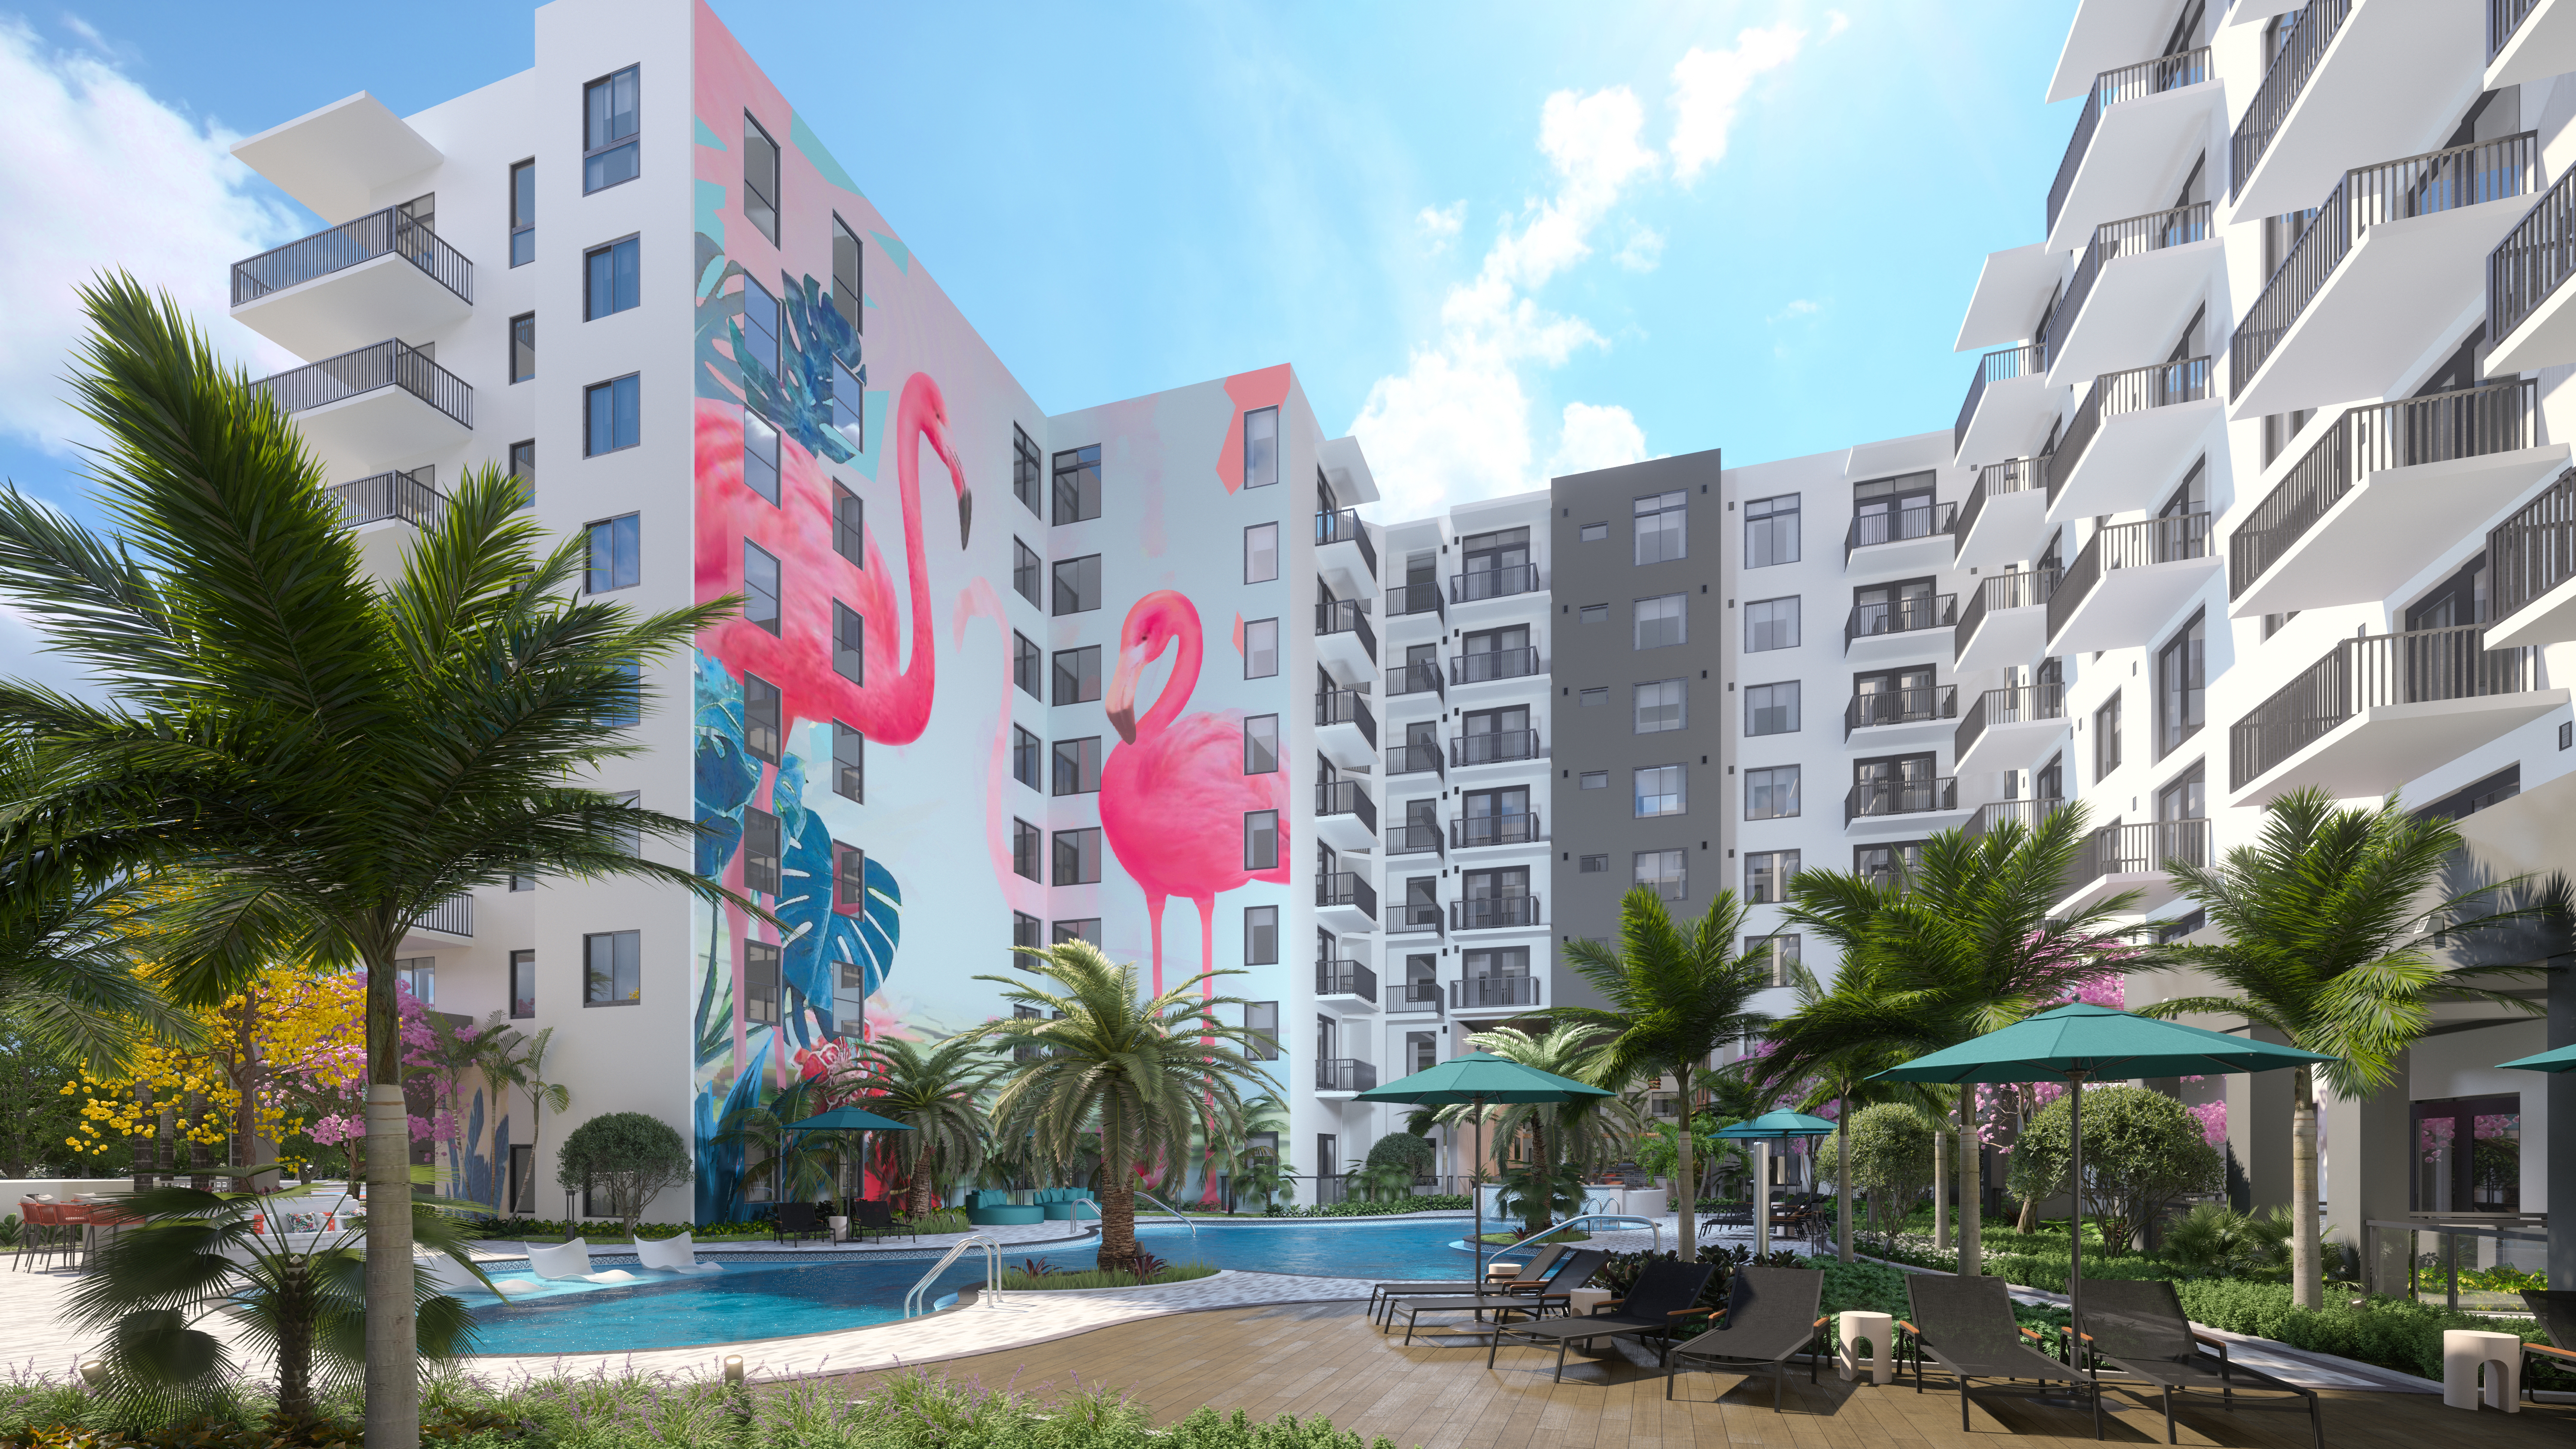 Leksa at CityPlace: Leksa at CityPlace Apartments and Penthouses Now Preleasing in Miami’s Doral District.